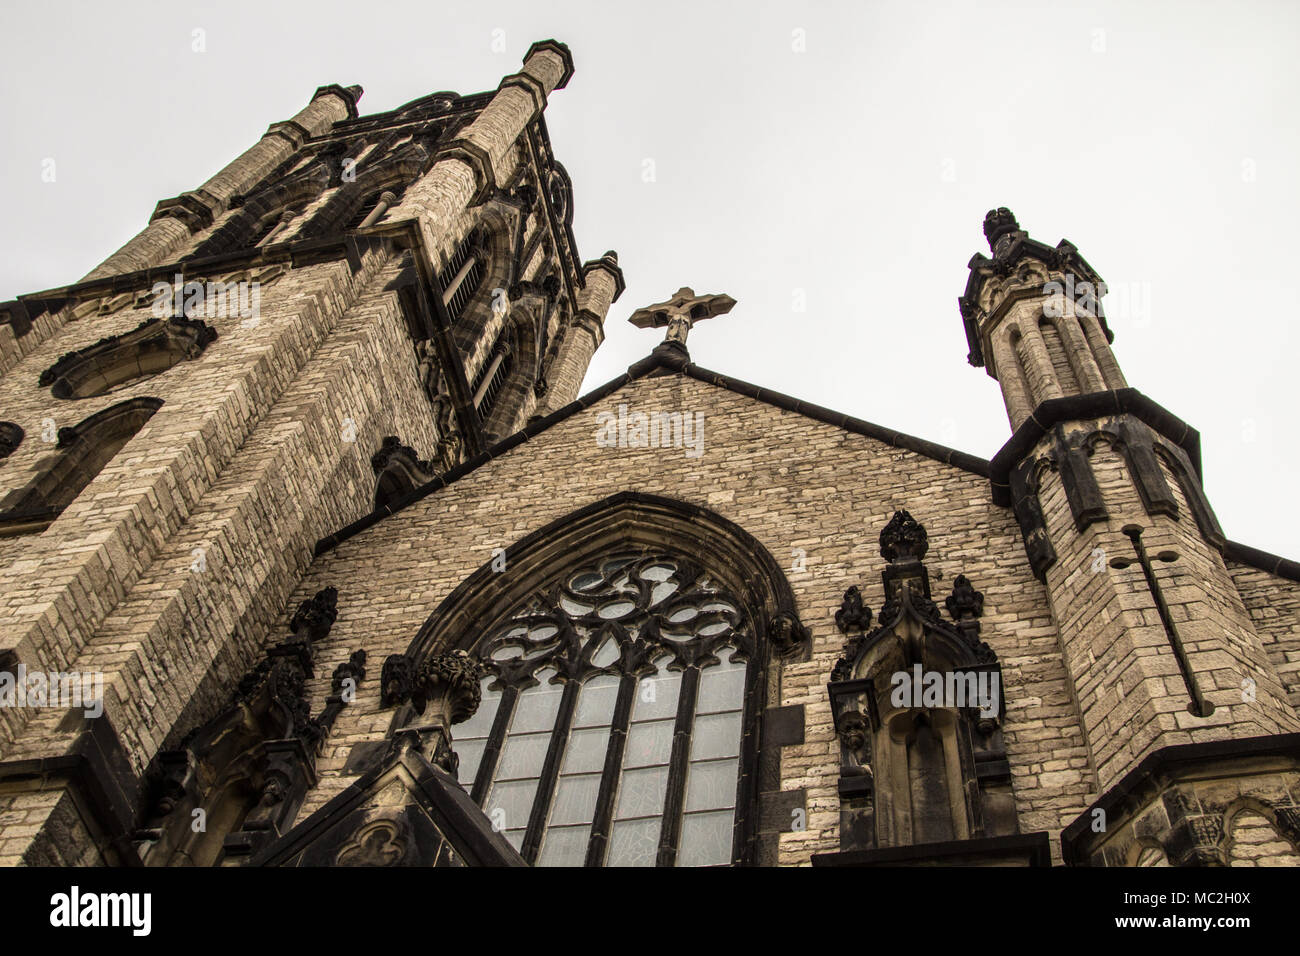 Detroit, Michigan, USA - March 28, 2018: Exterior of the St. Johns Episcopal Church. The Victorian Gothic Church is located in downtown Detroit. Stock Photo